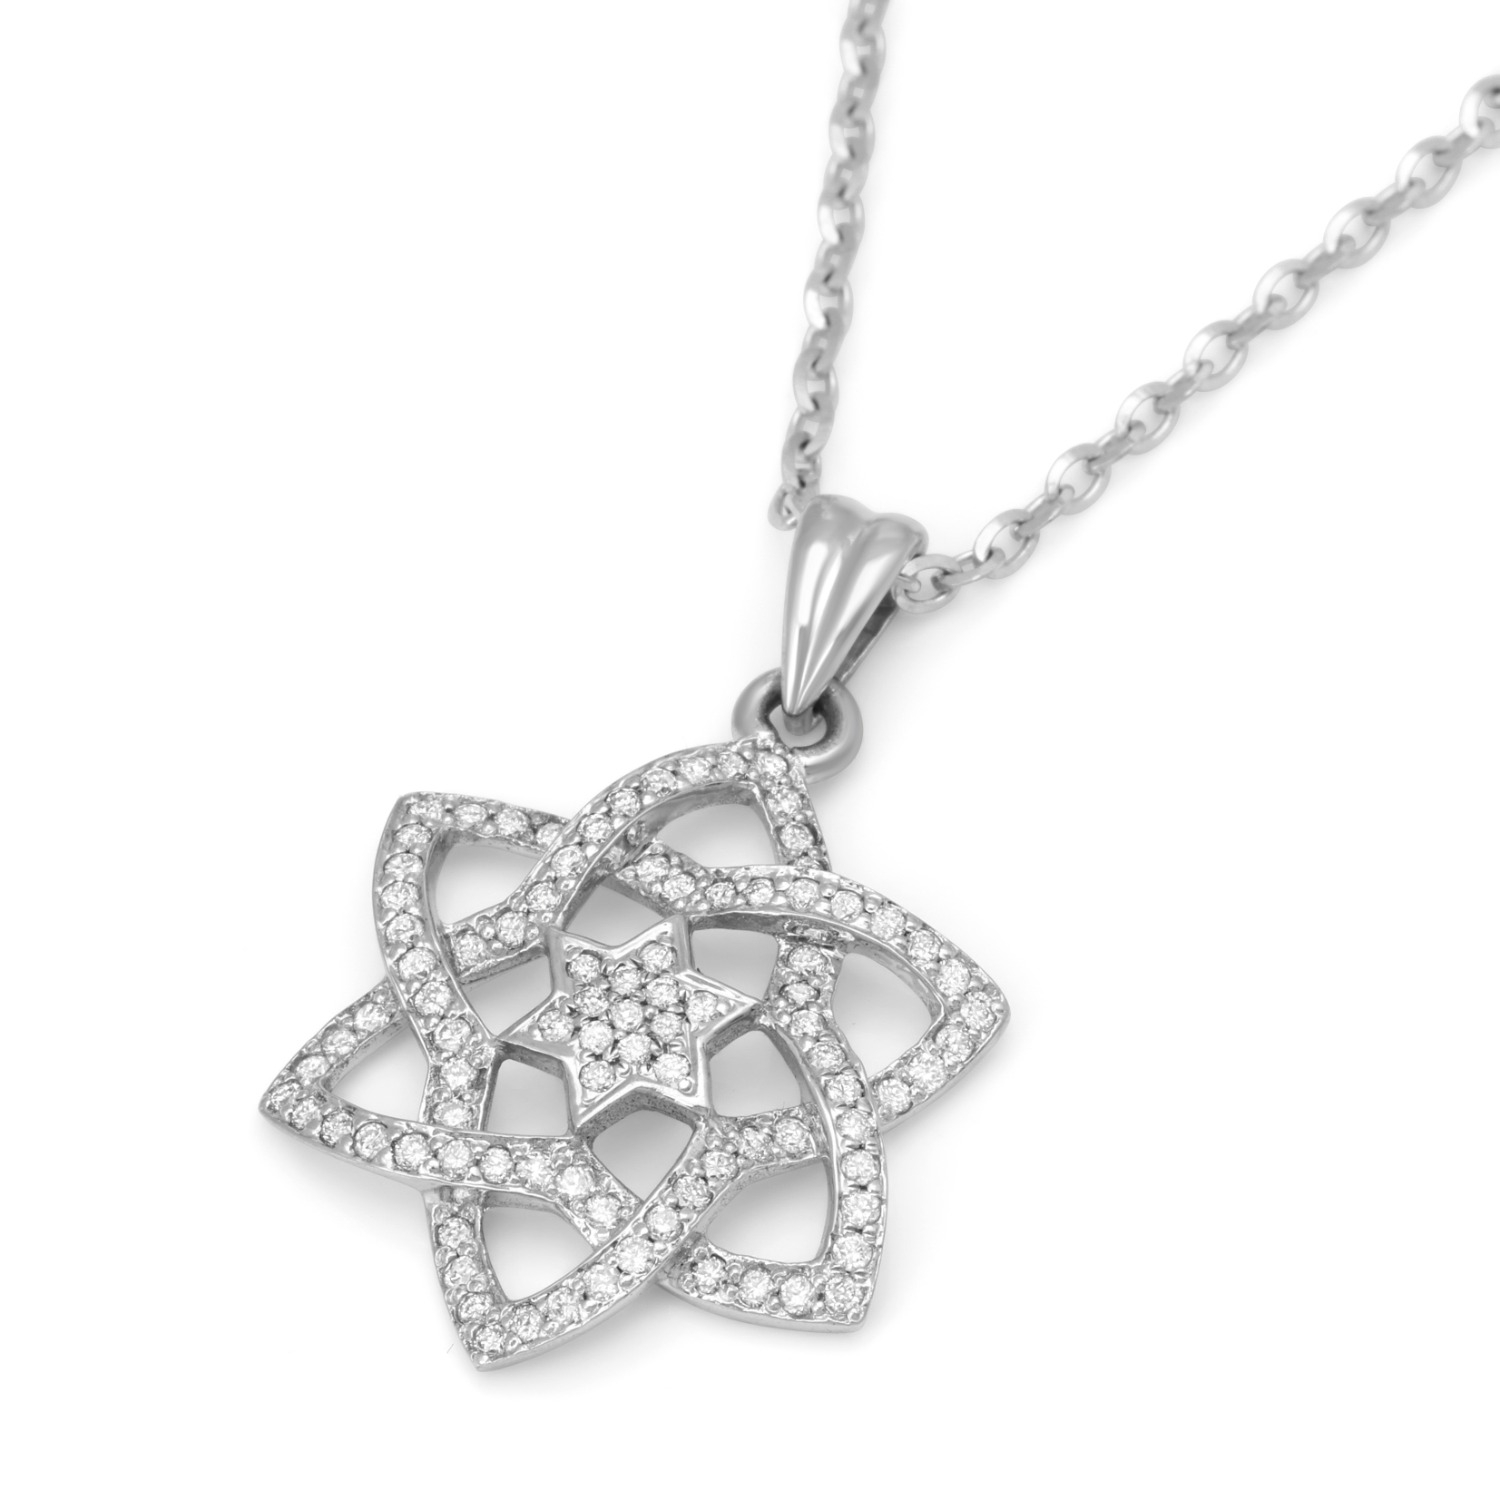 14K Gold Stylized Star of David Pendant with Diamonds and Central Star - 1